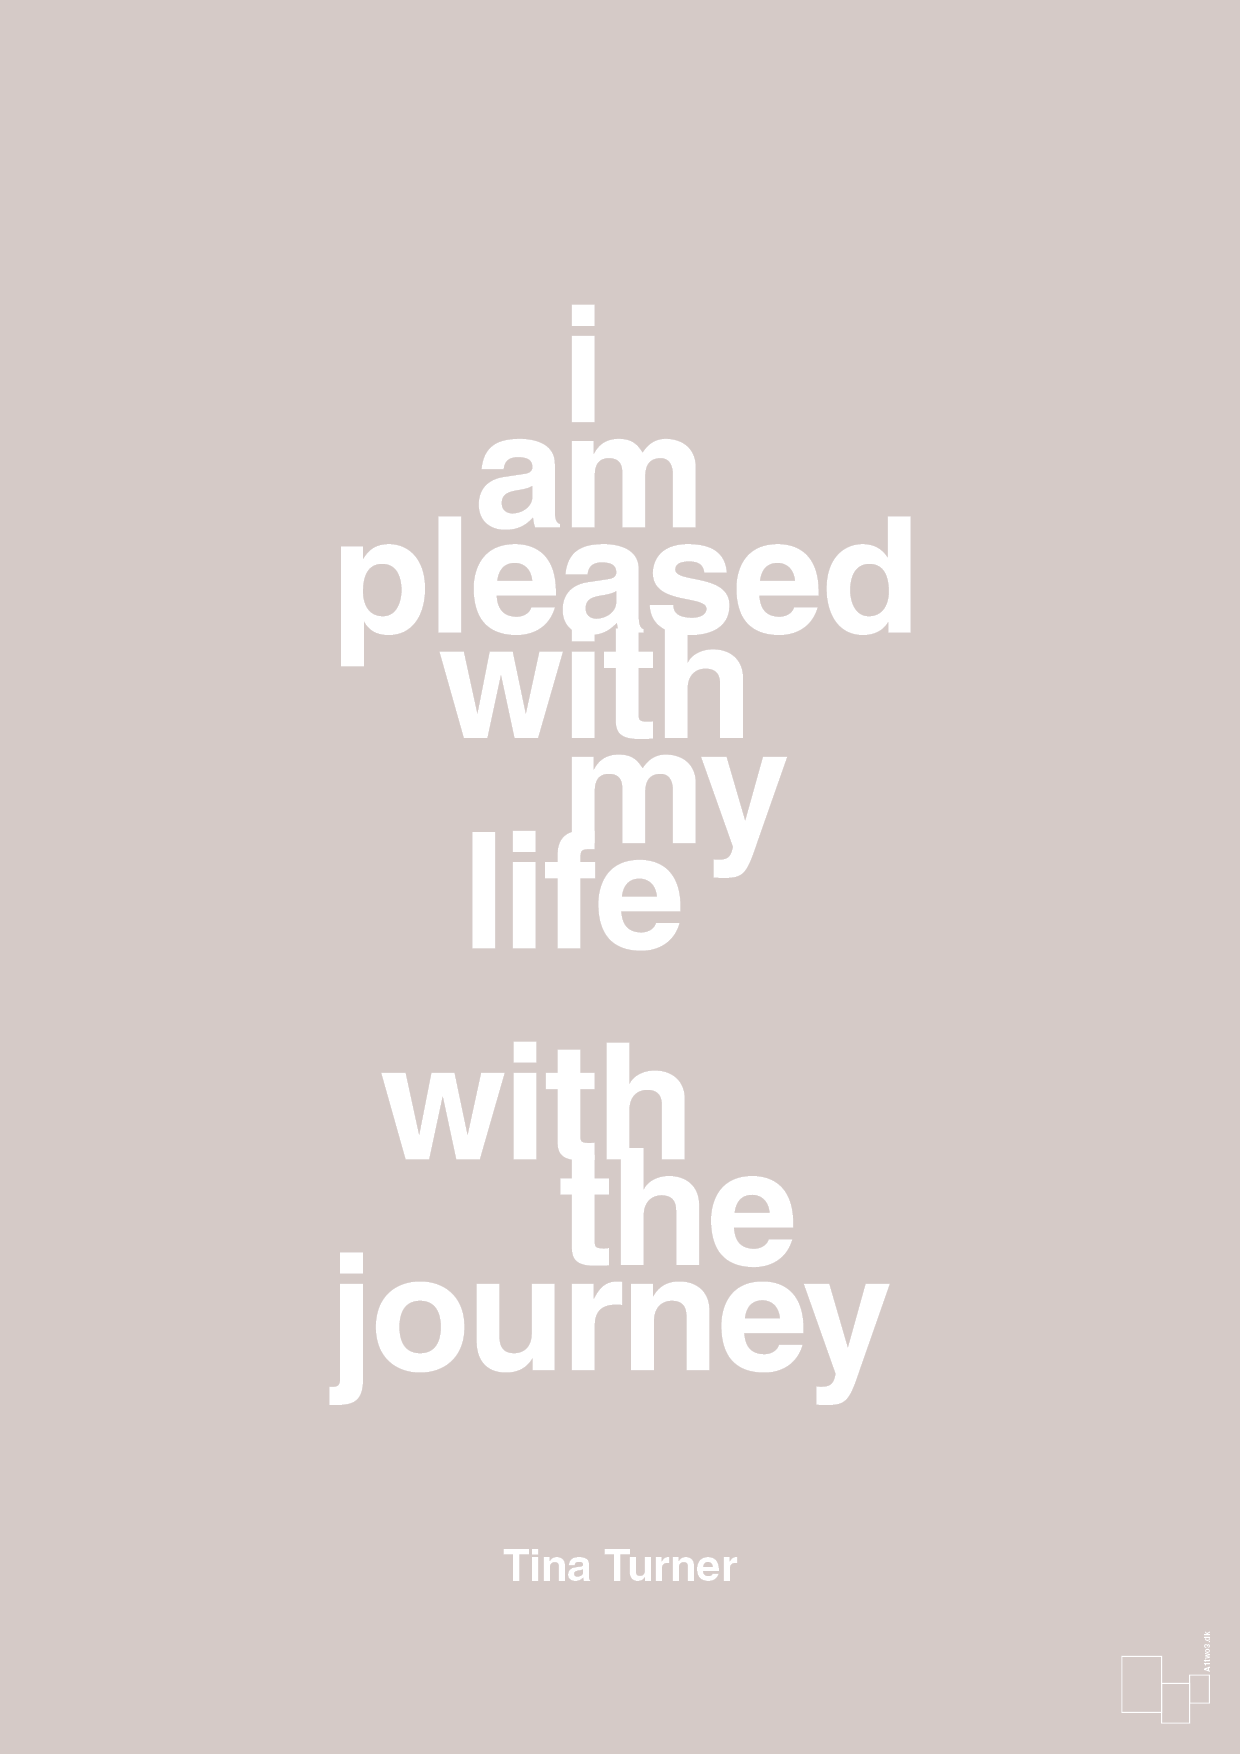 i am pleased with my life with the journey - Plakat med Citater i Broken Beige